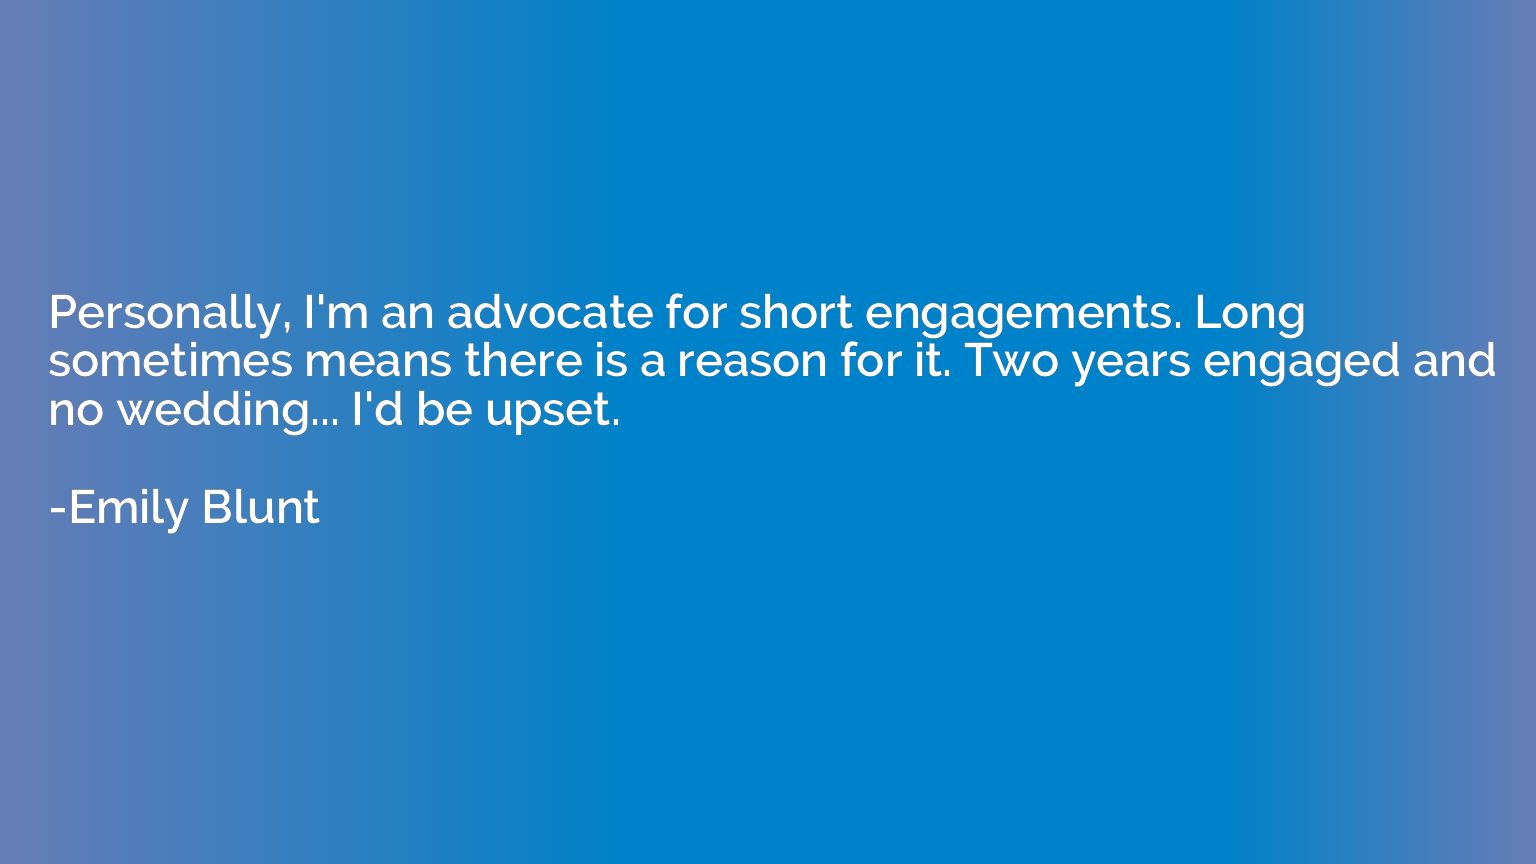 Personally, I'm an advocate for short engagements. Long some